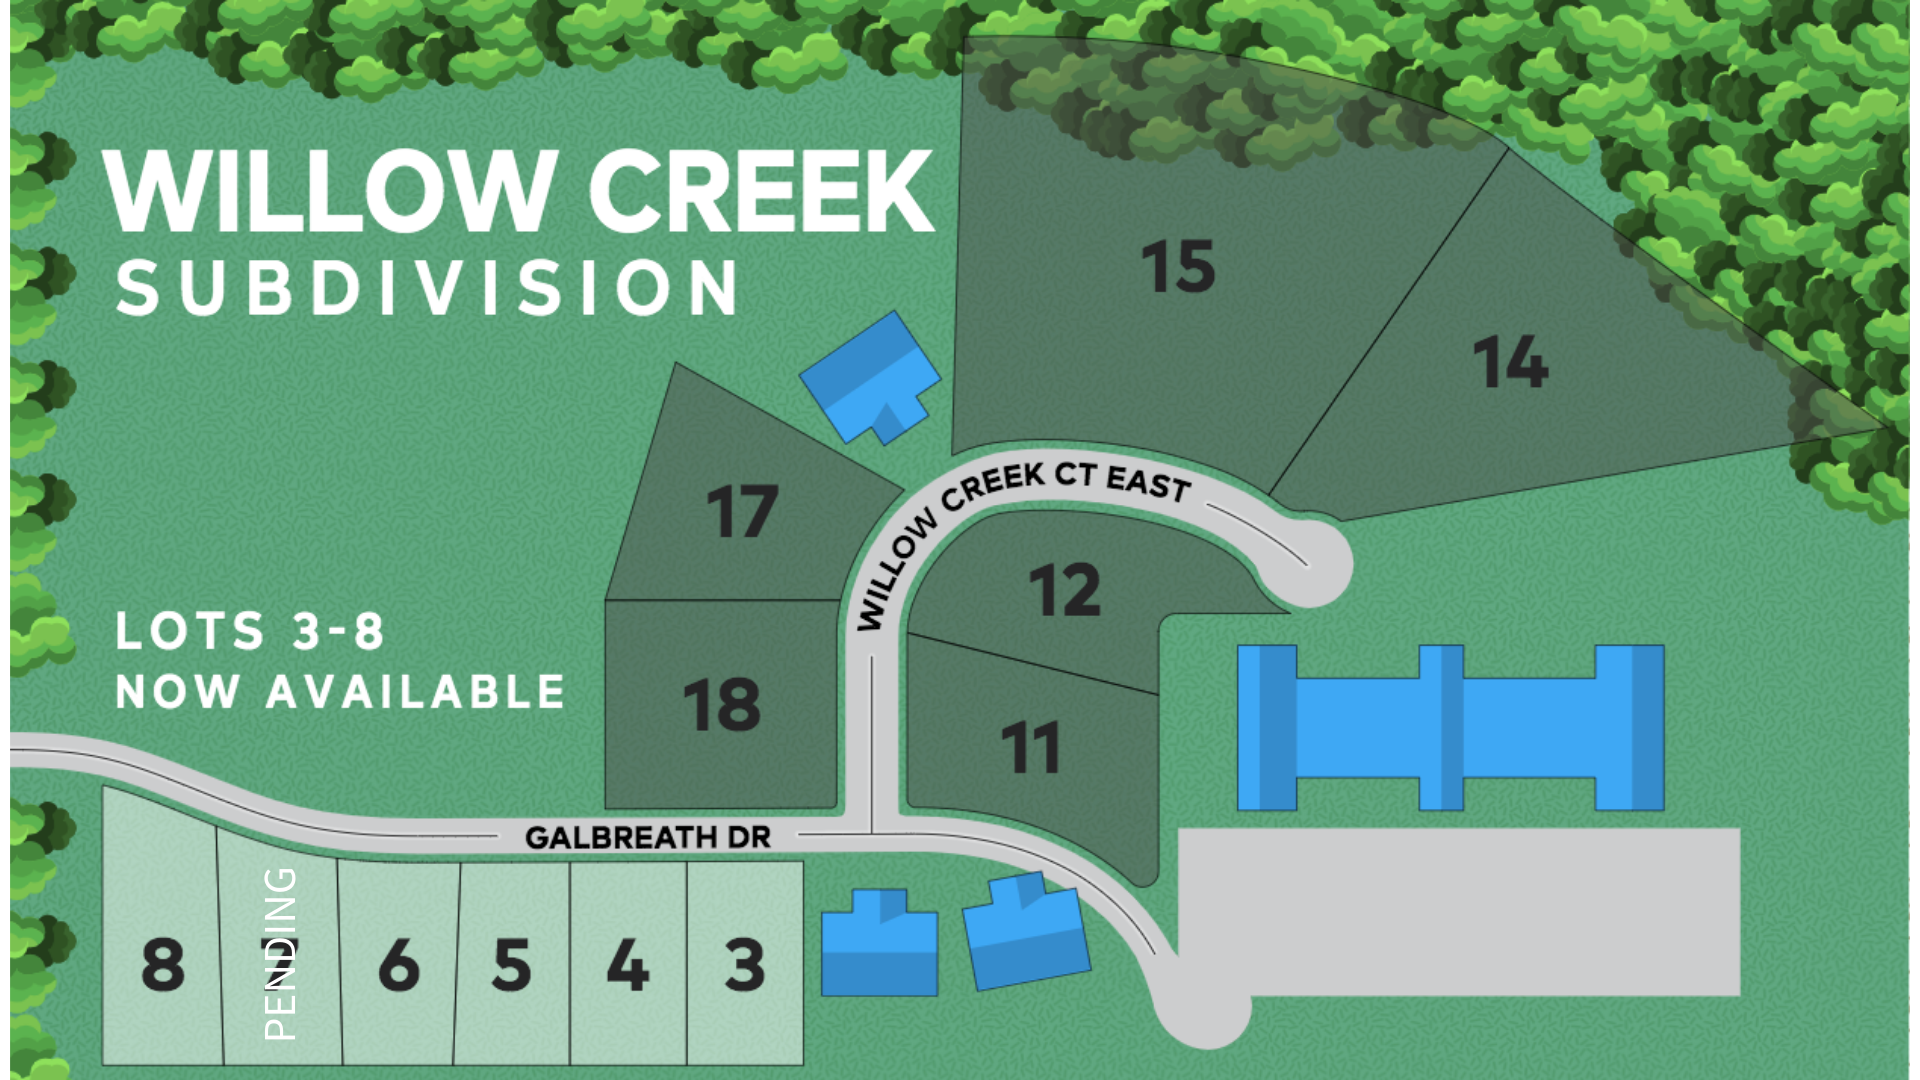 WILLOW CREEK LOT MAP WITH 7 PEND